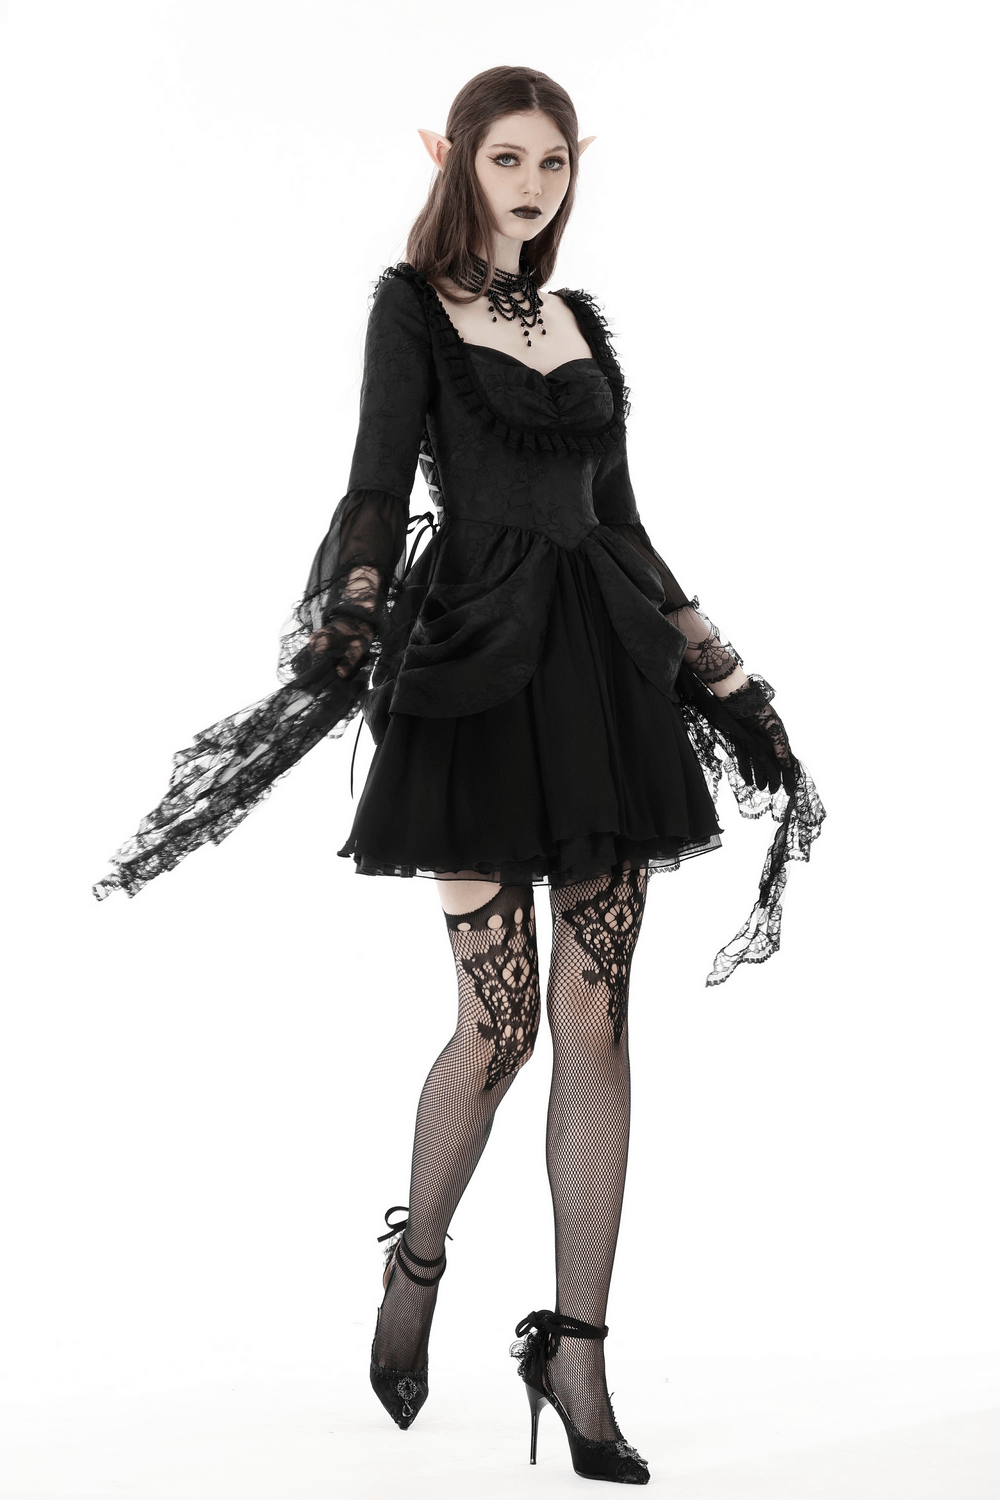 Dark Victorian Dress With Gothic Lace Ruffle Sleeves